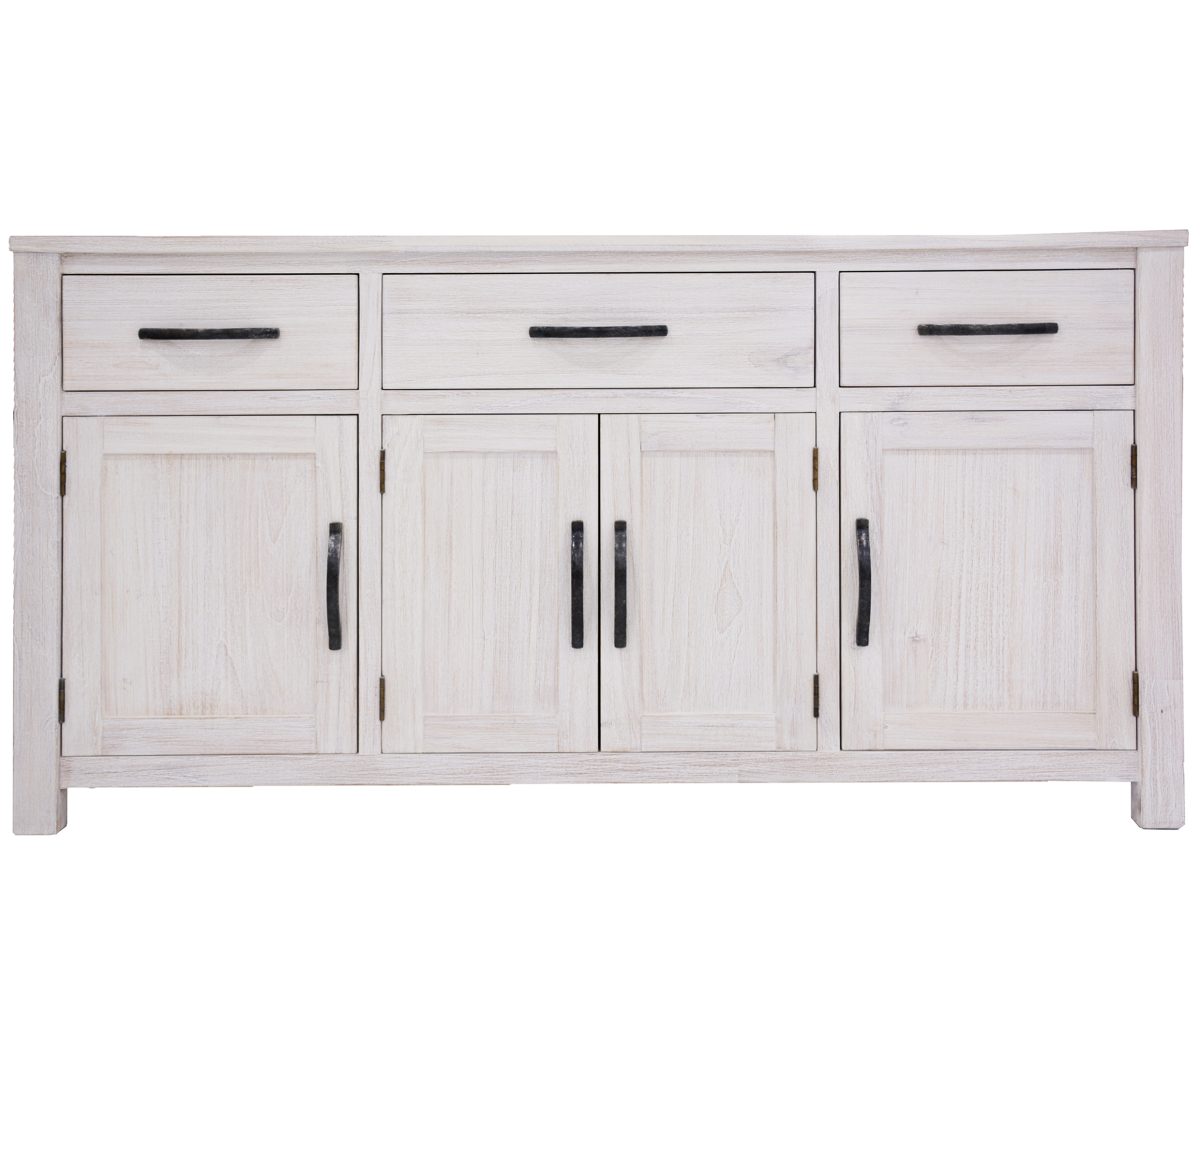 Foxglove Buffet Table 158cm 4 Door 3 Drawer Solid Mt Ash Timber Wood – White